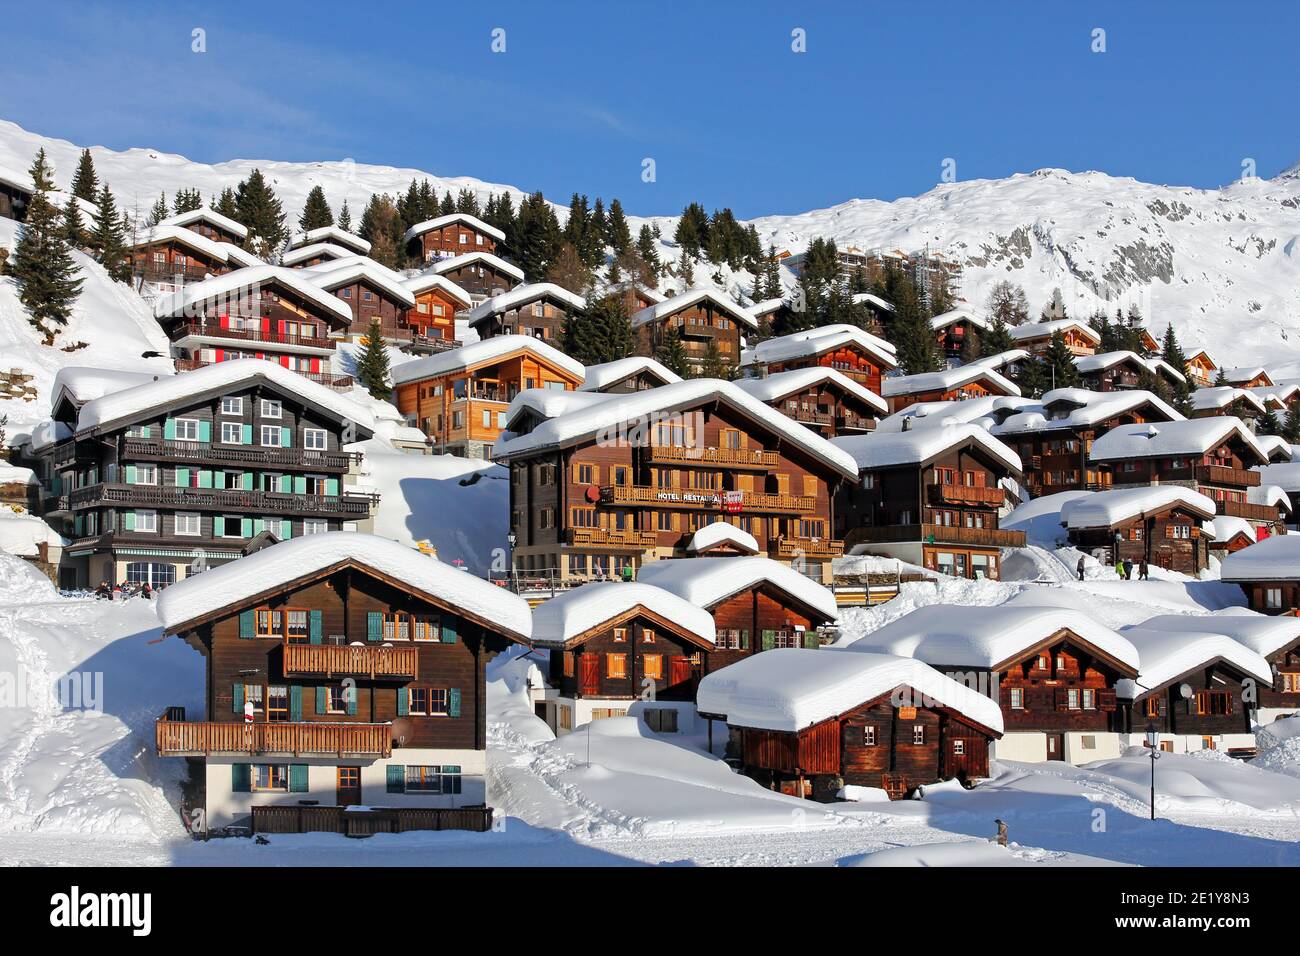 A typical winter scene of a winter ski resort in the Alps. This particular village is Bettmeralp in the Canton of Valais (Wallis), Switzerland. As the Stock Photo